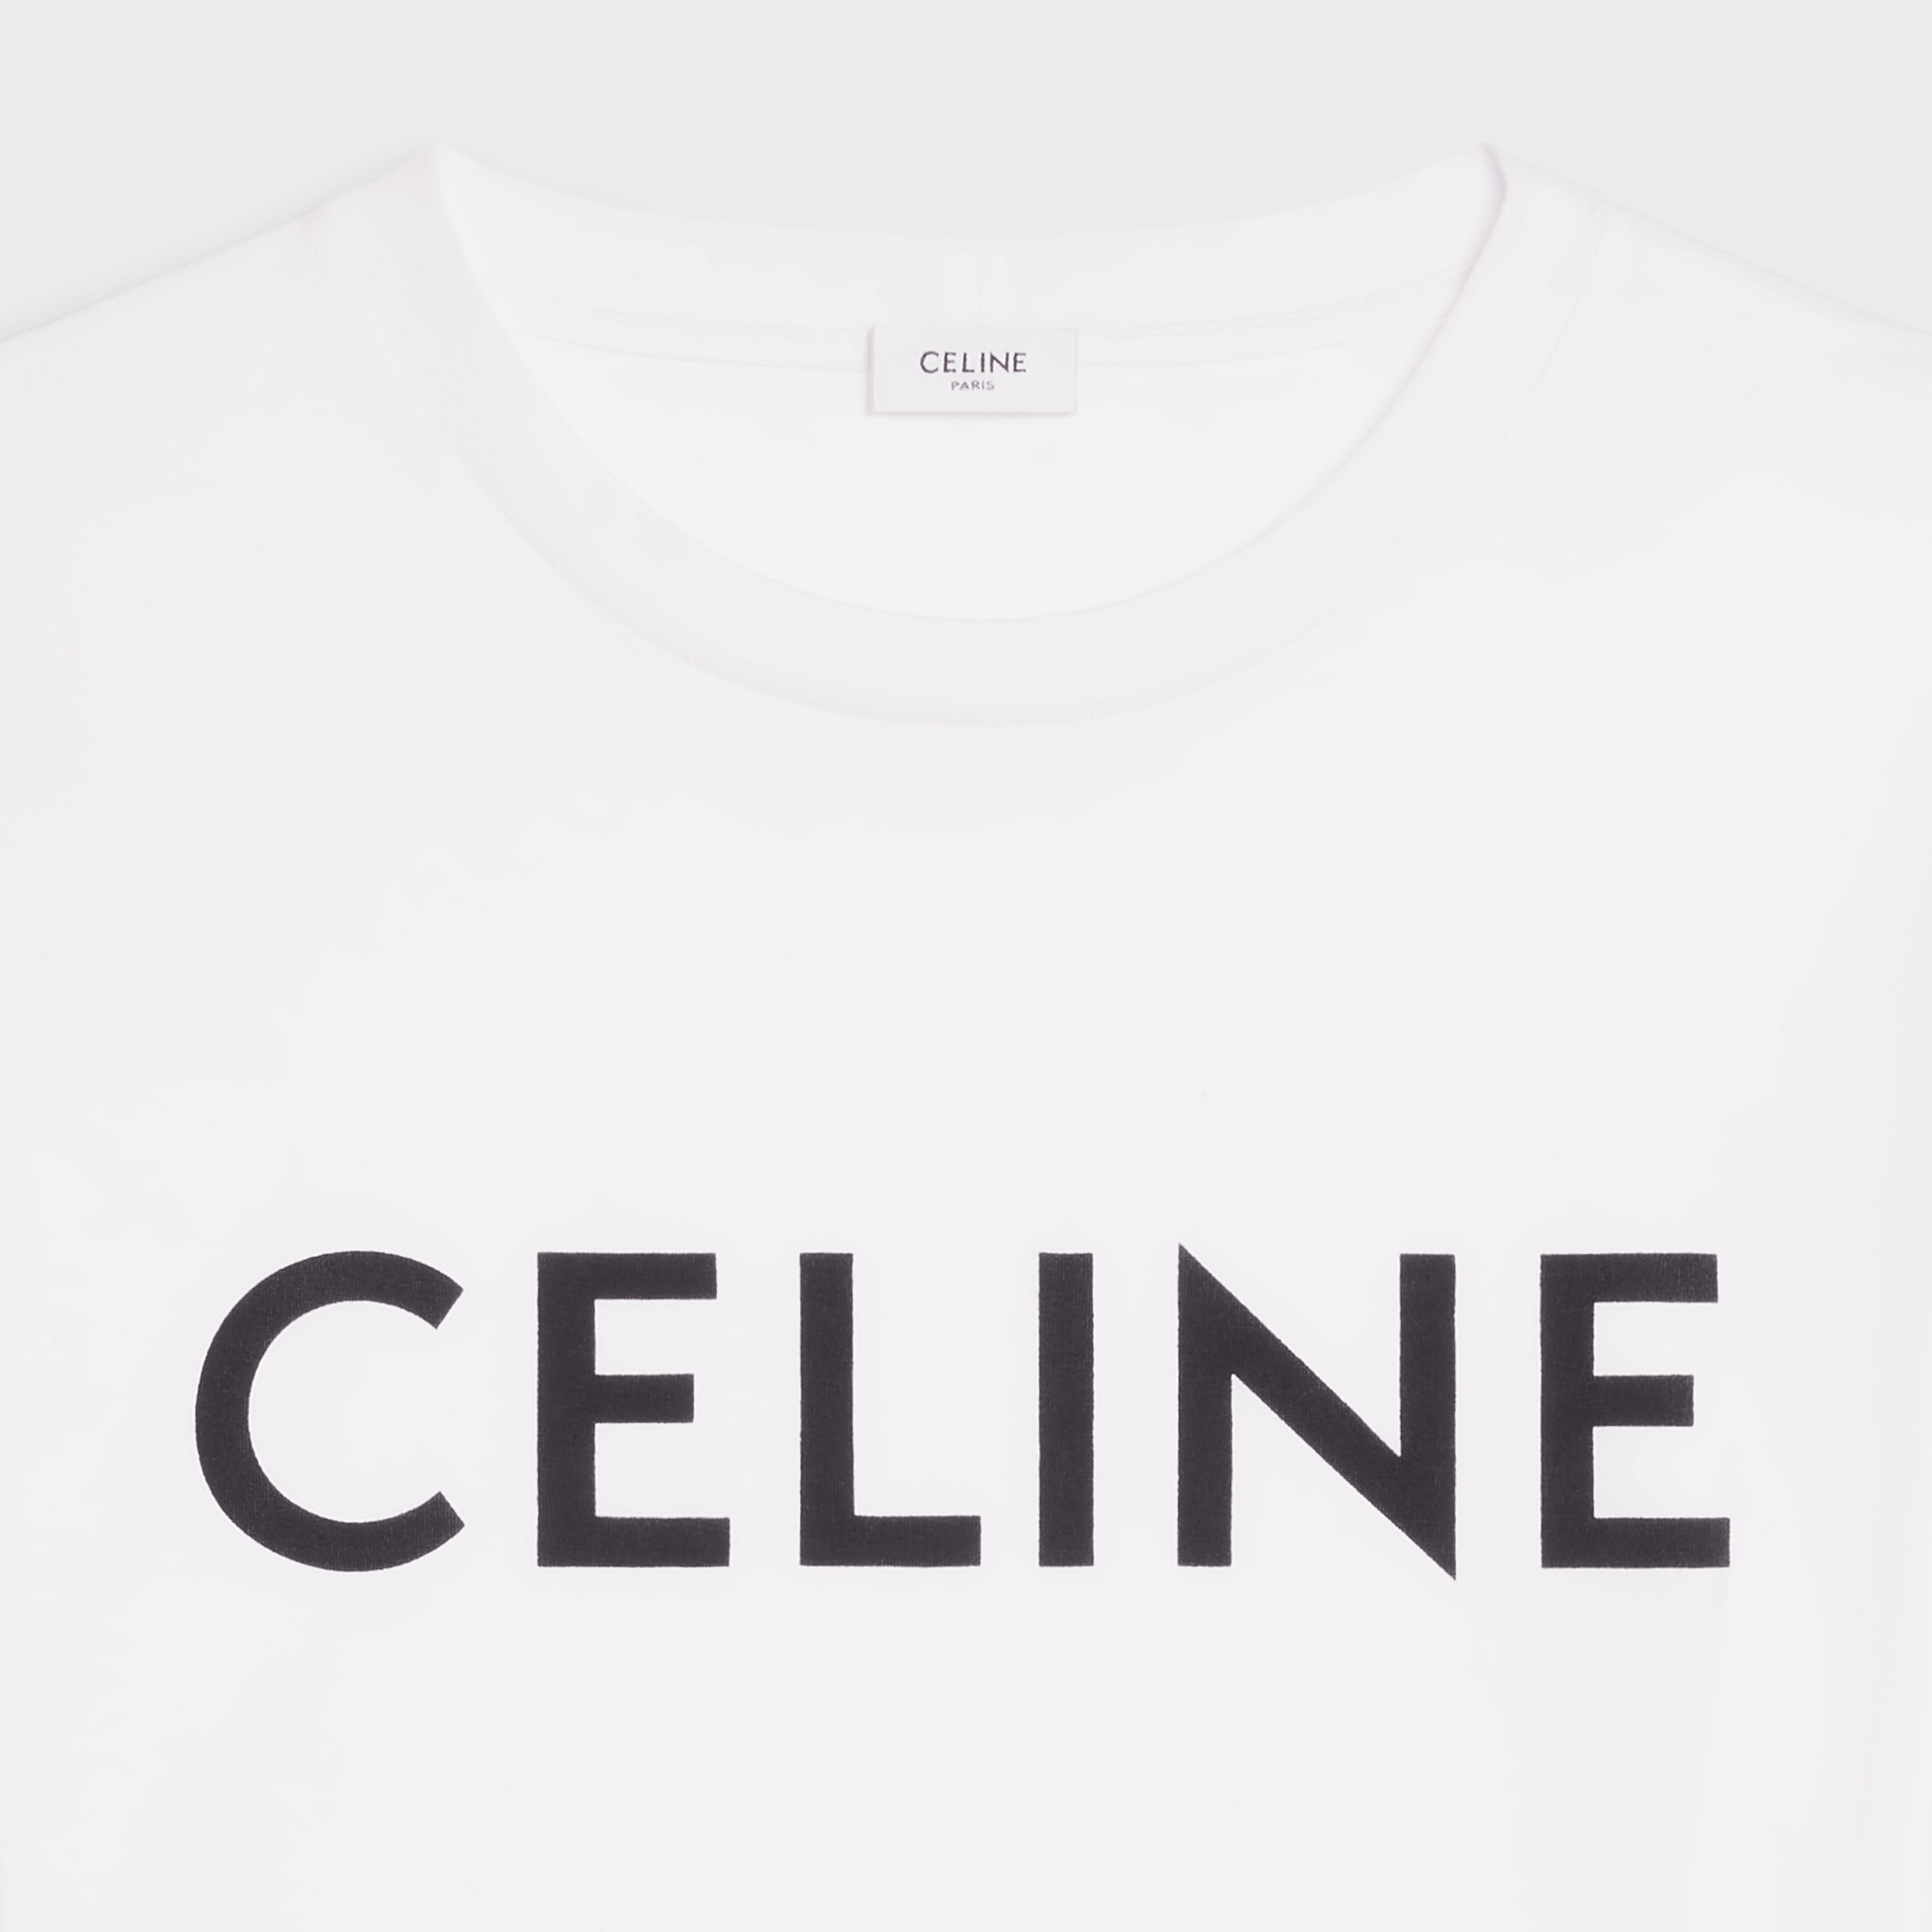 CROPPED CELINE T-SHIRT IN COTTON JERSEY - 3